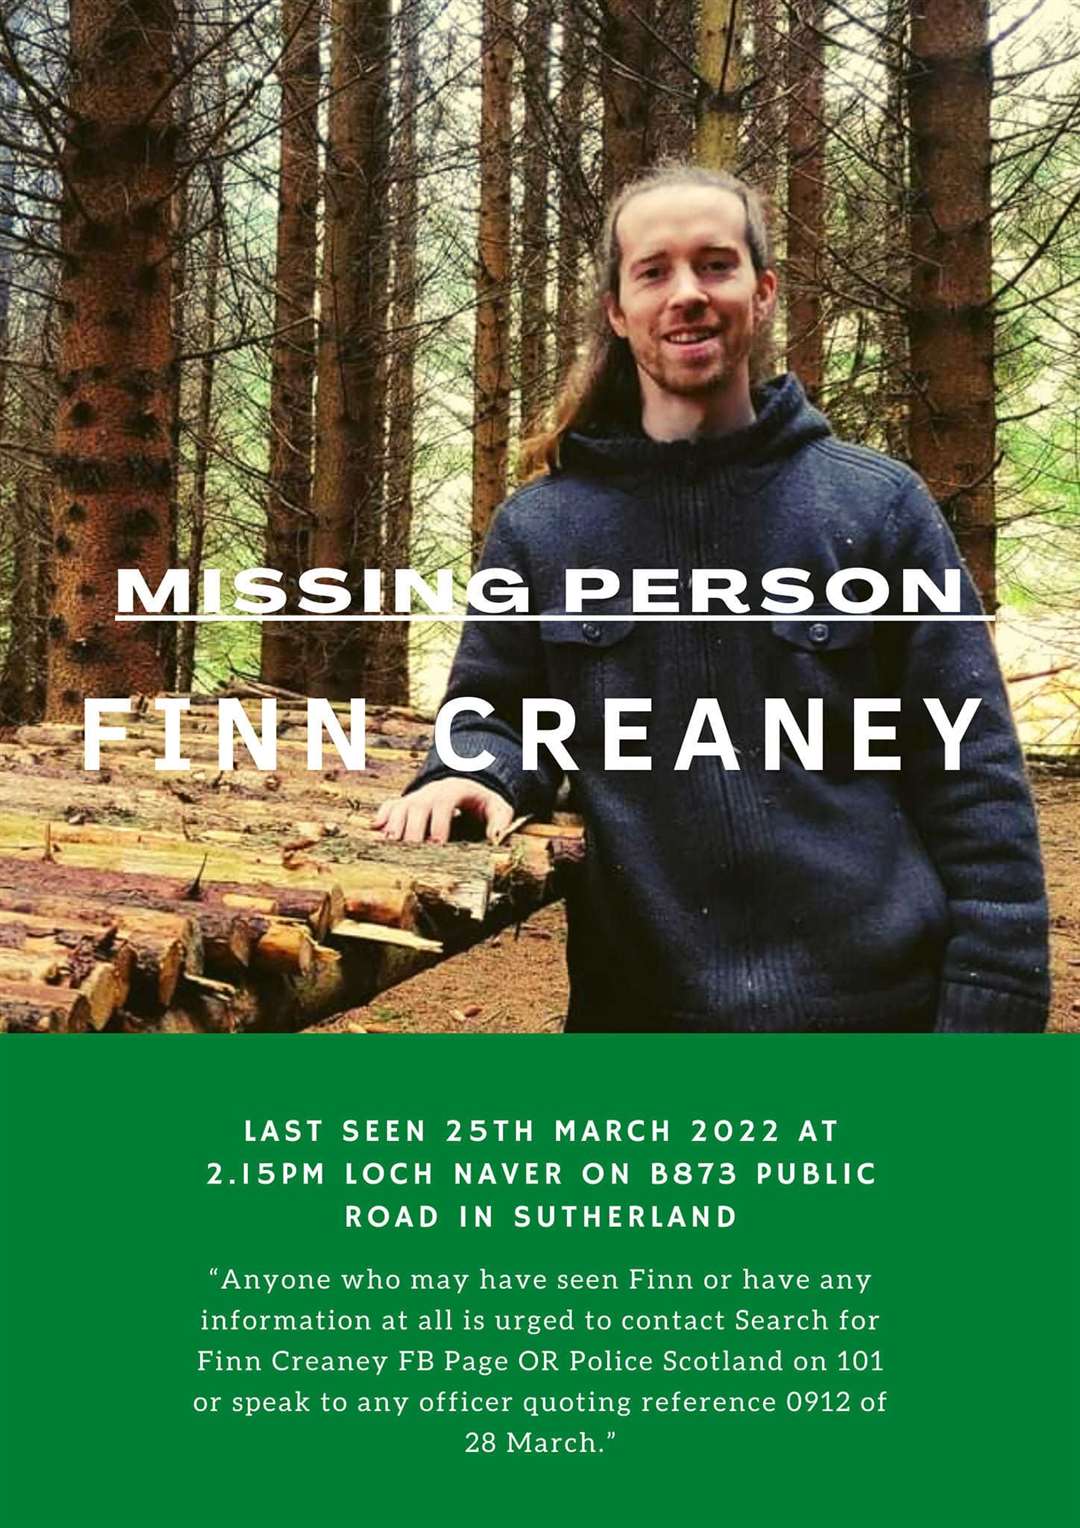 Efforts continue to trace Finn Creaney.